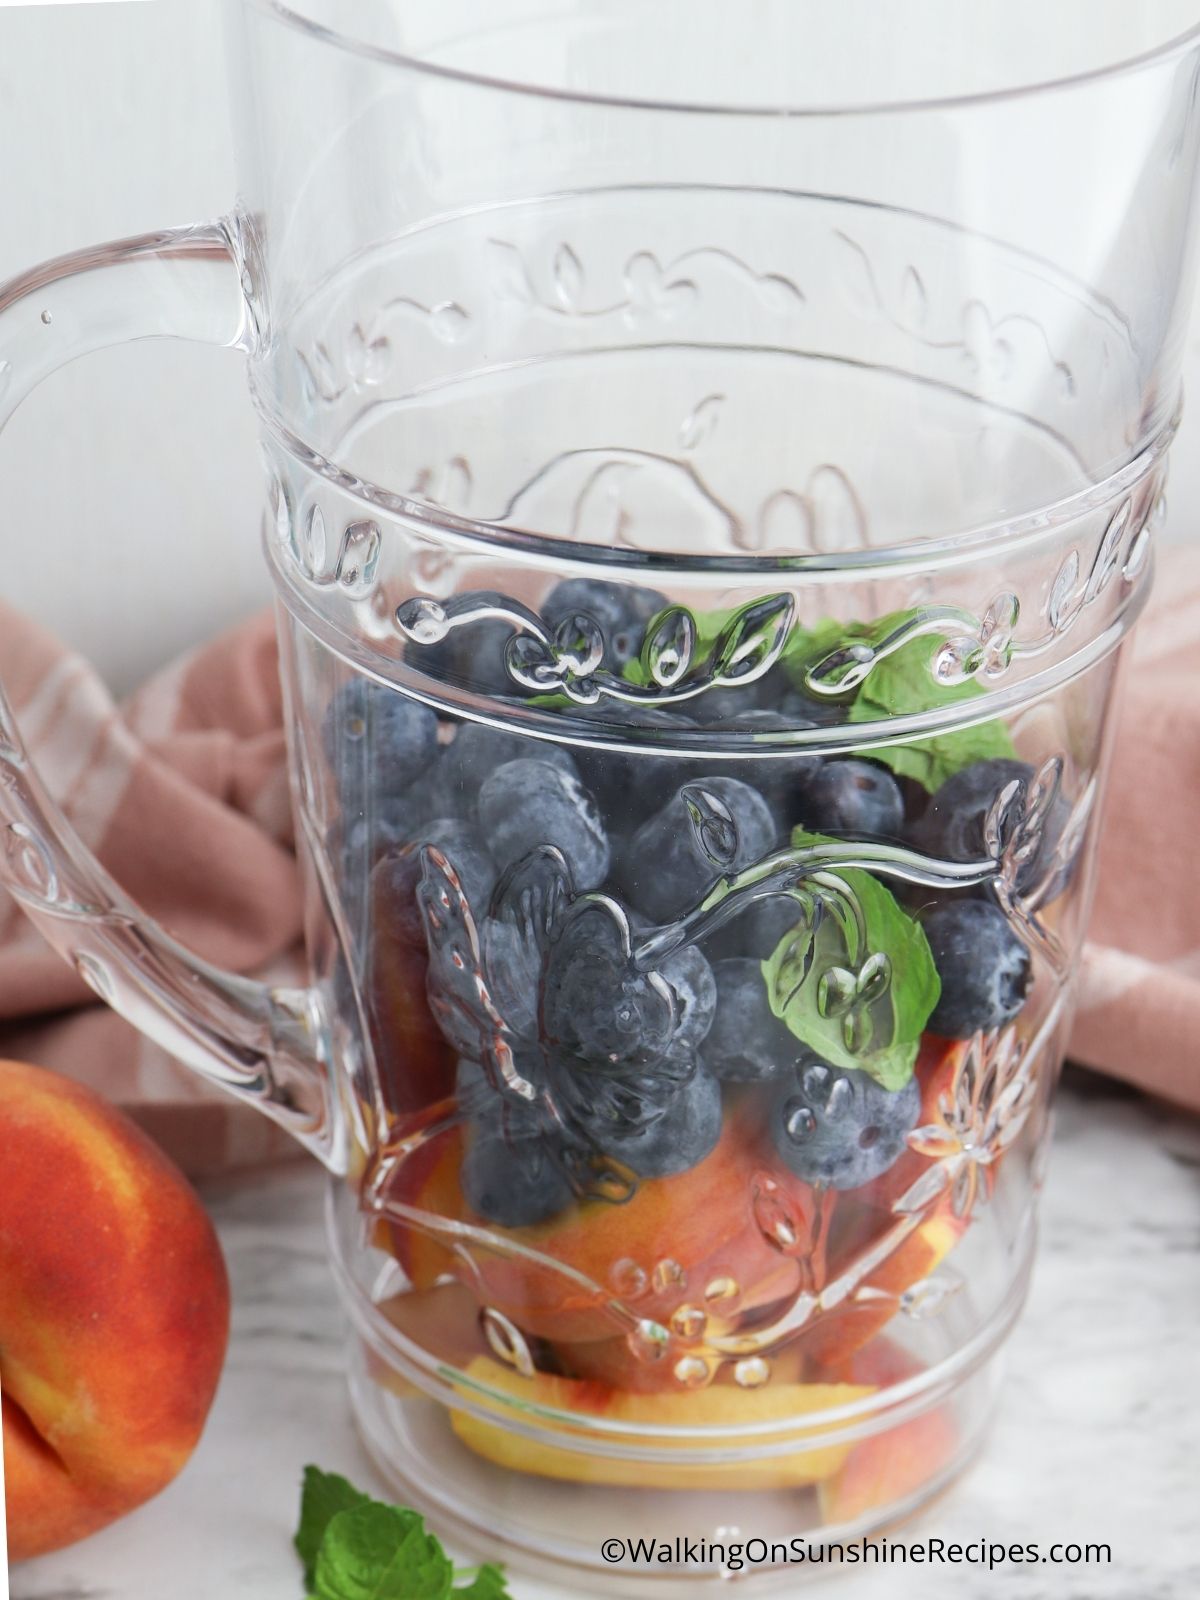 Place blueberries and peaches in pitcher.